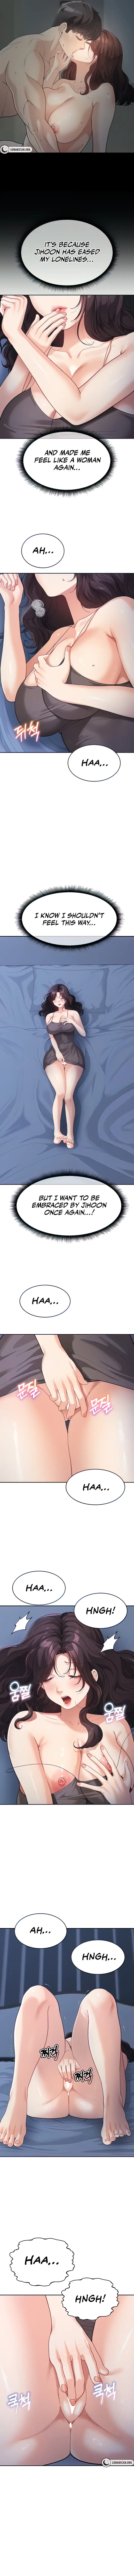 is-it-your-mother-or-sister-chap-32-2